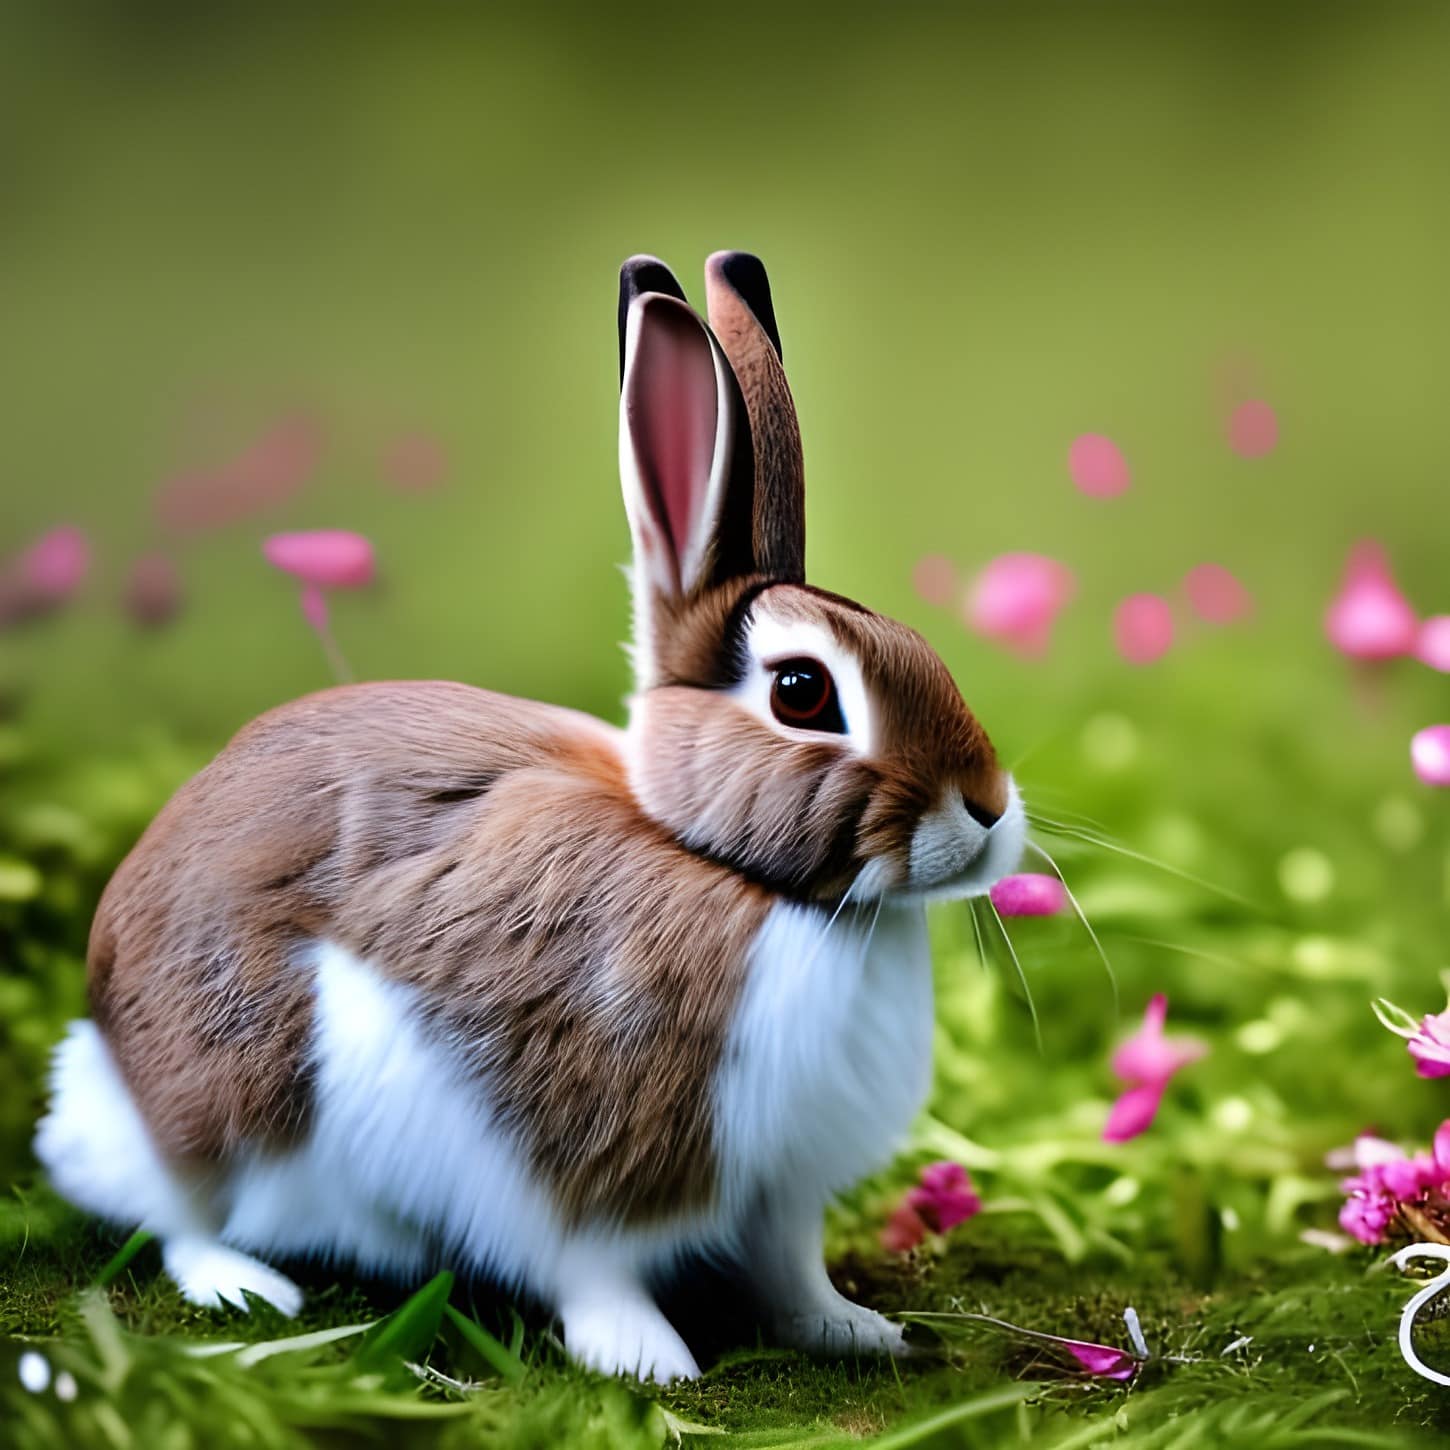 Cute rabbit in nature close up photo – artificial intelligence art